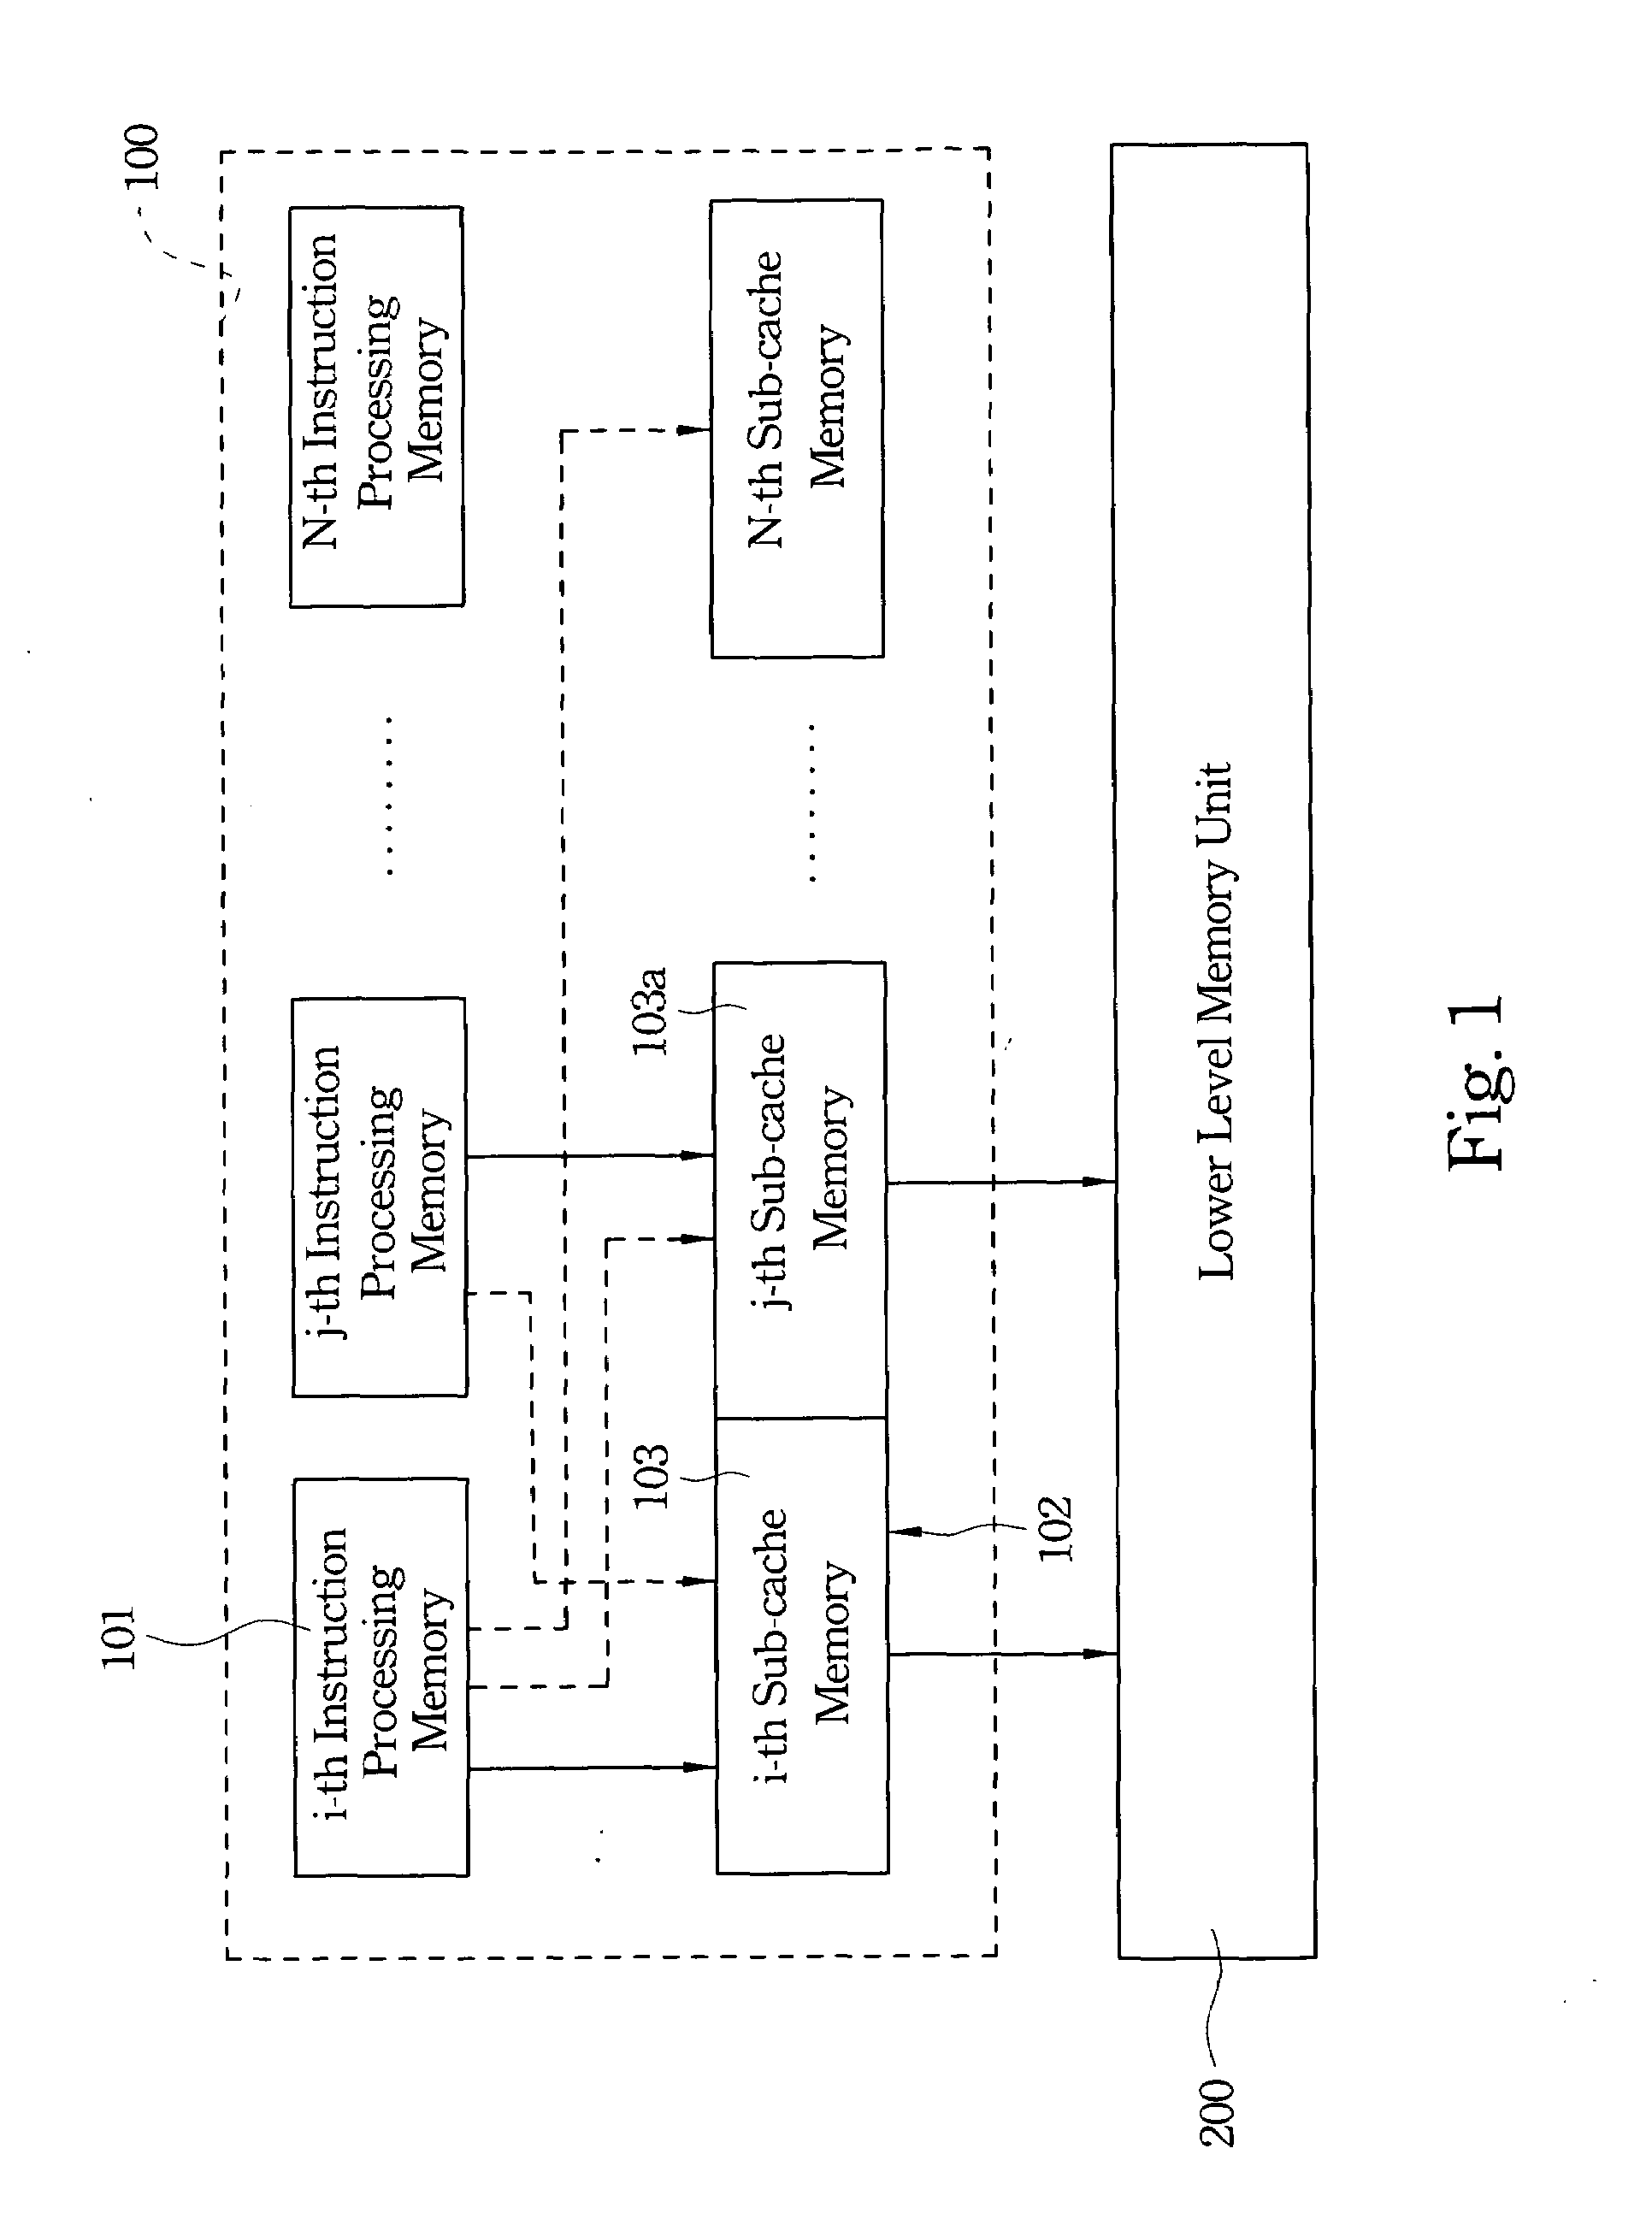 Method of accessing cache memory for parallel processing processors